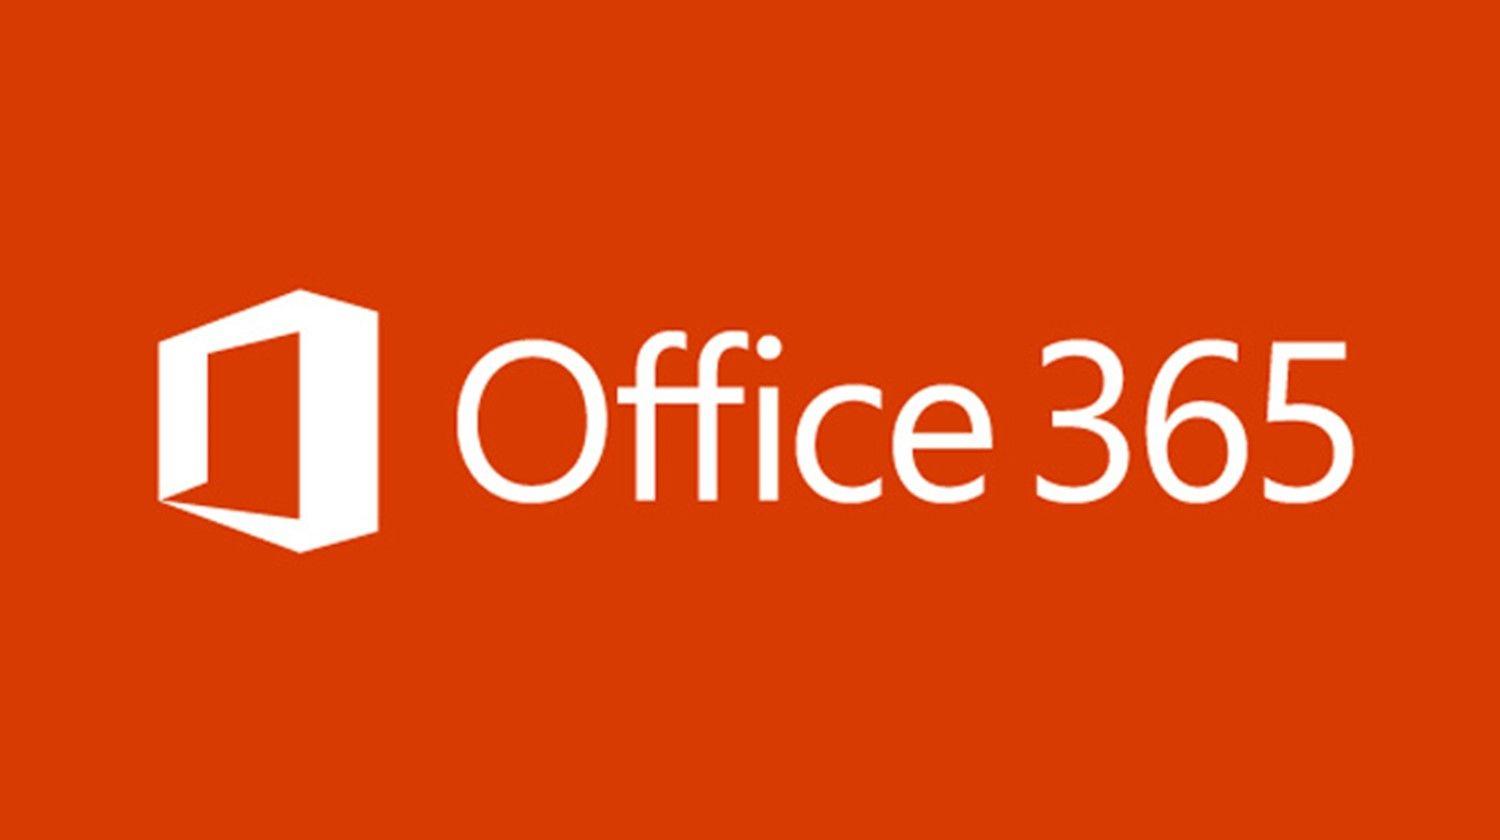 Microsoft Office 365 Team's Logo - Can Office 365 Replace your Intranet?| Unily Insights